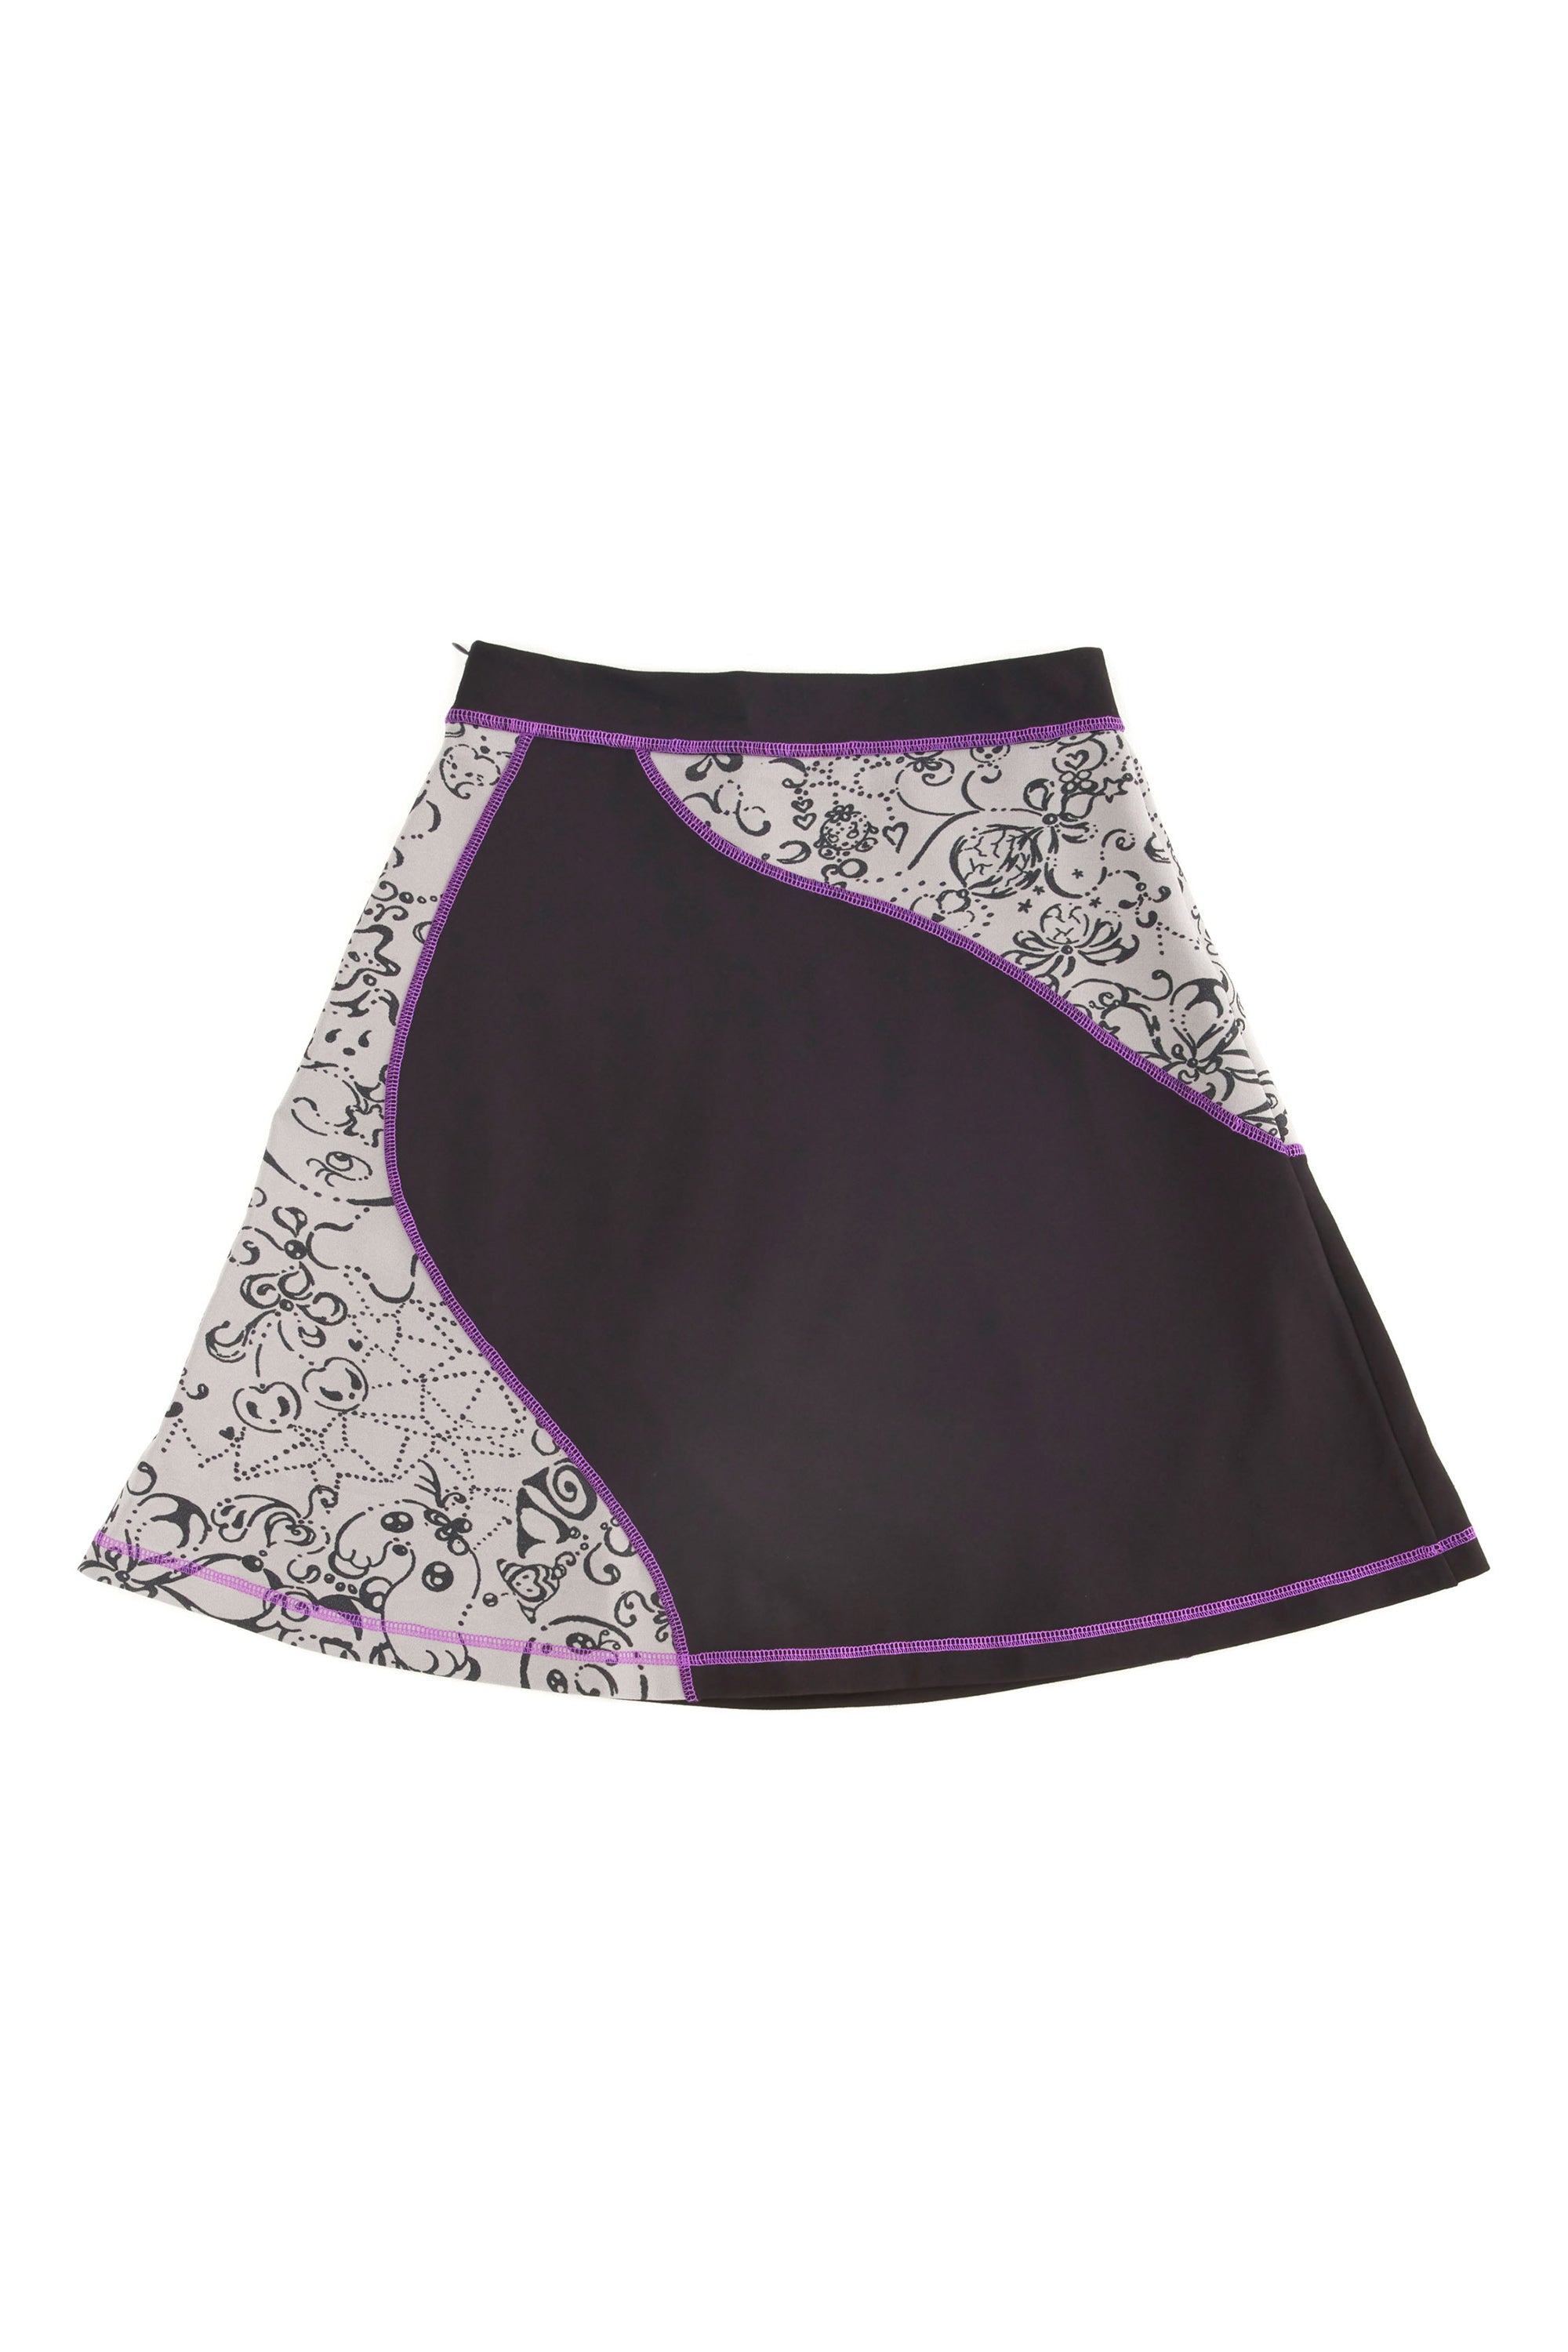 The COCO STAR X P.A.M. WAVE PANEL SKIRT  available online with global shipping, and in PAM Stores Melbourne and Sydney.